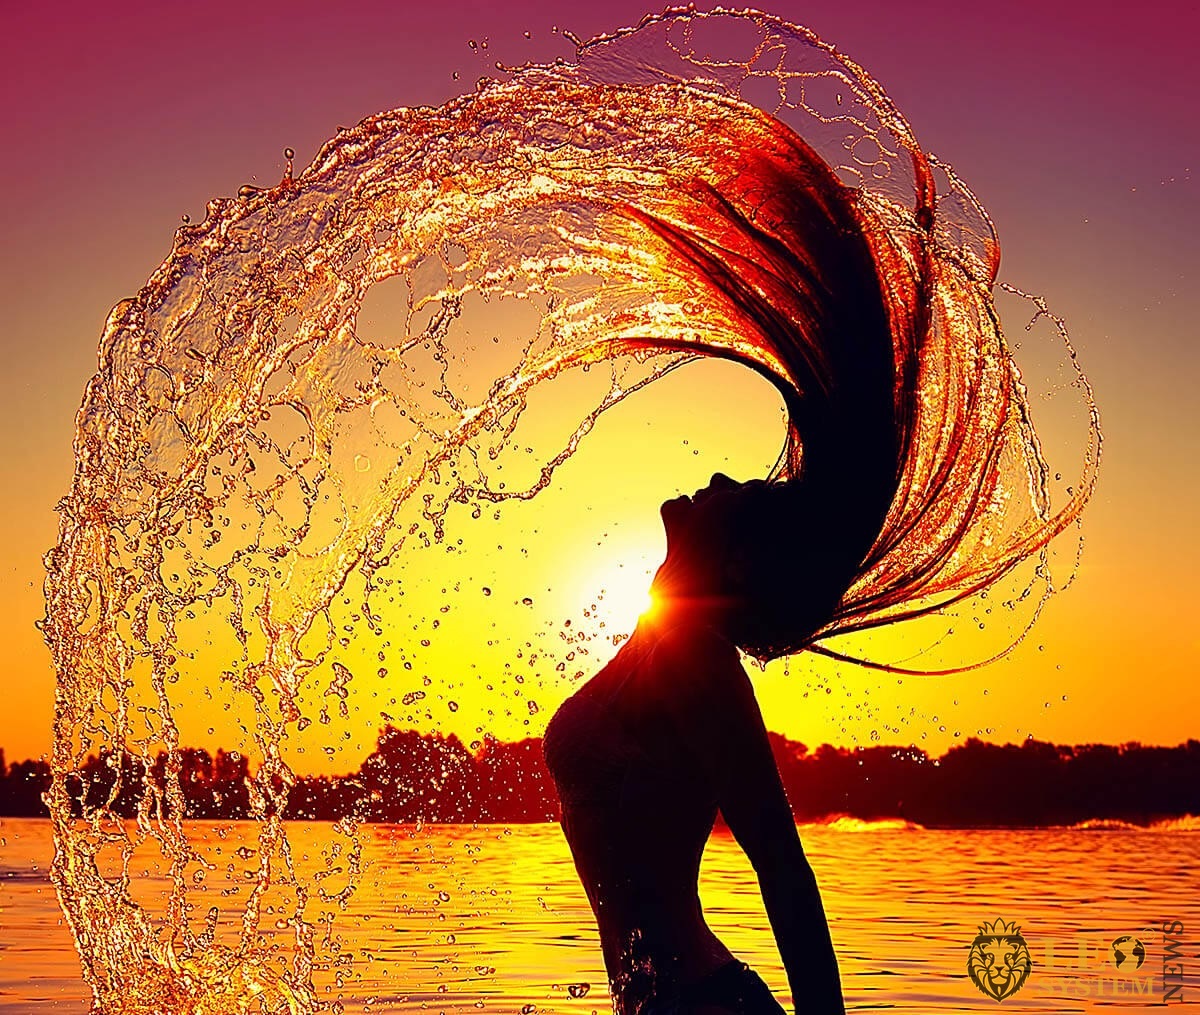 Image of a bathing woman at sunset